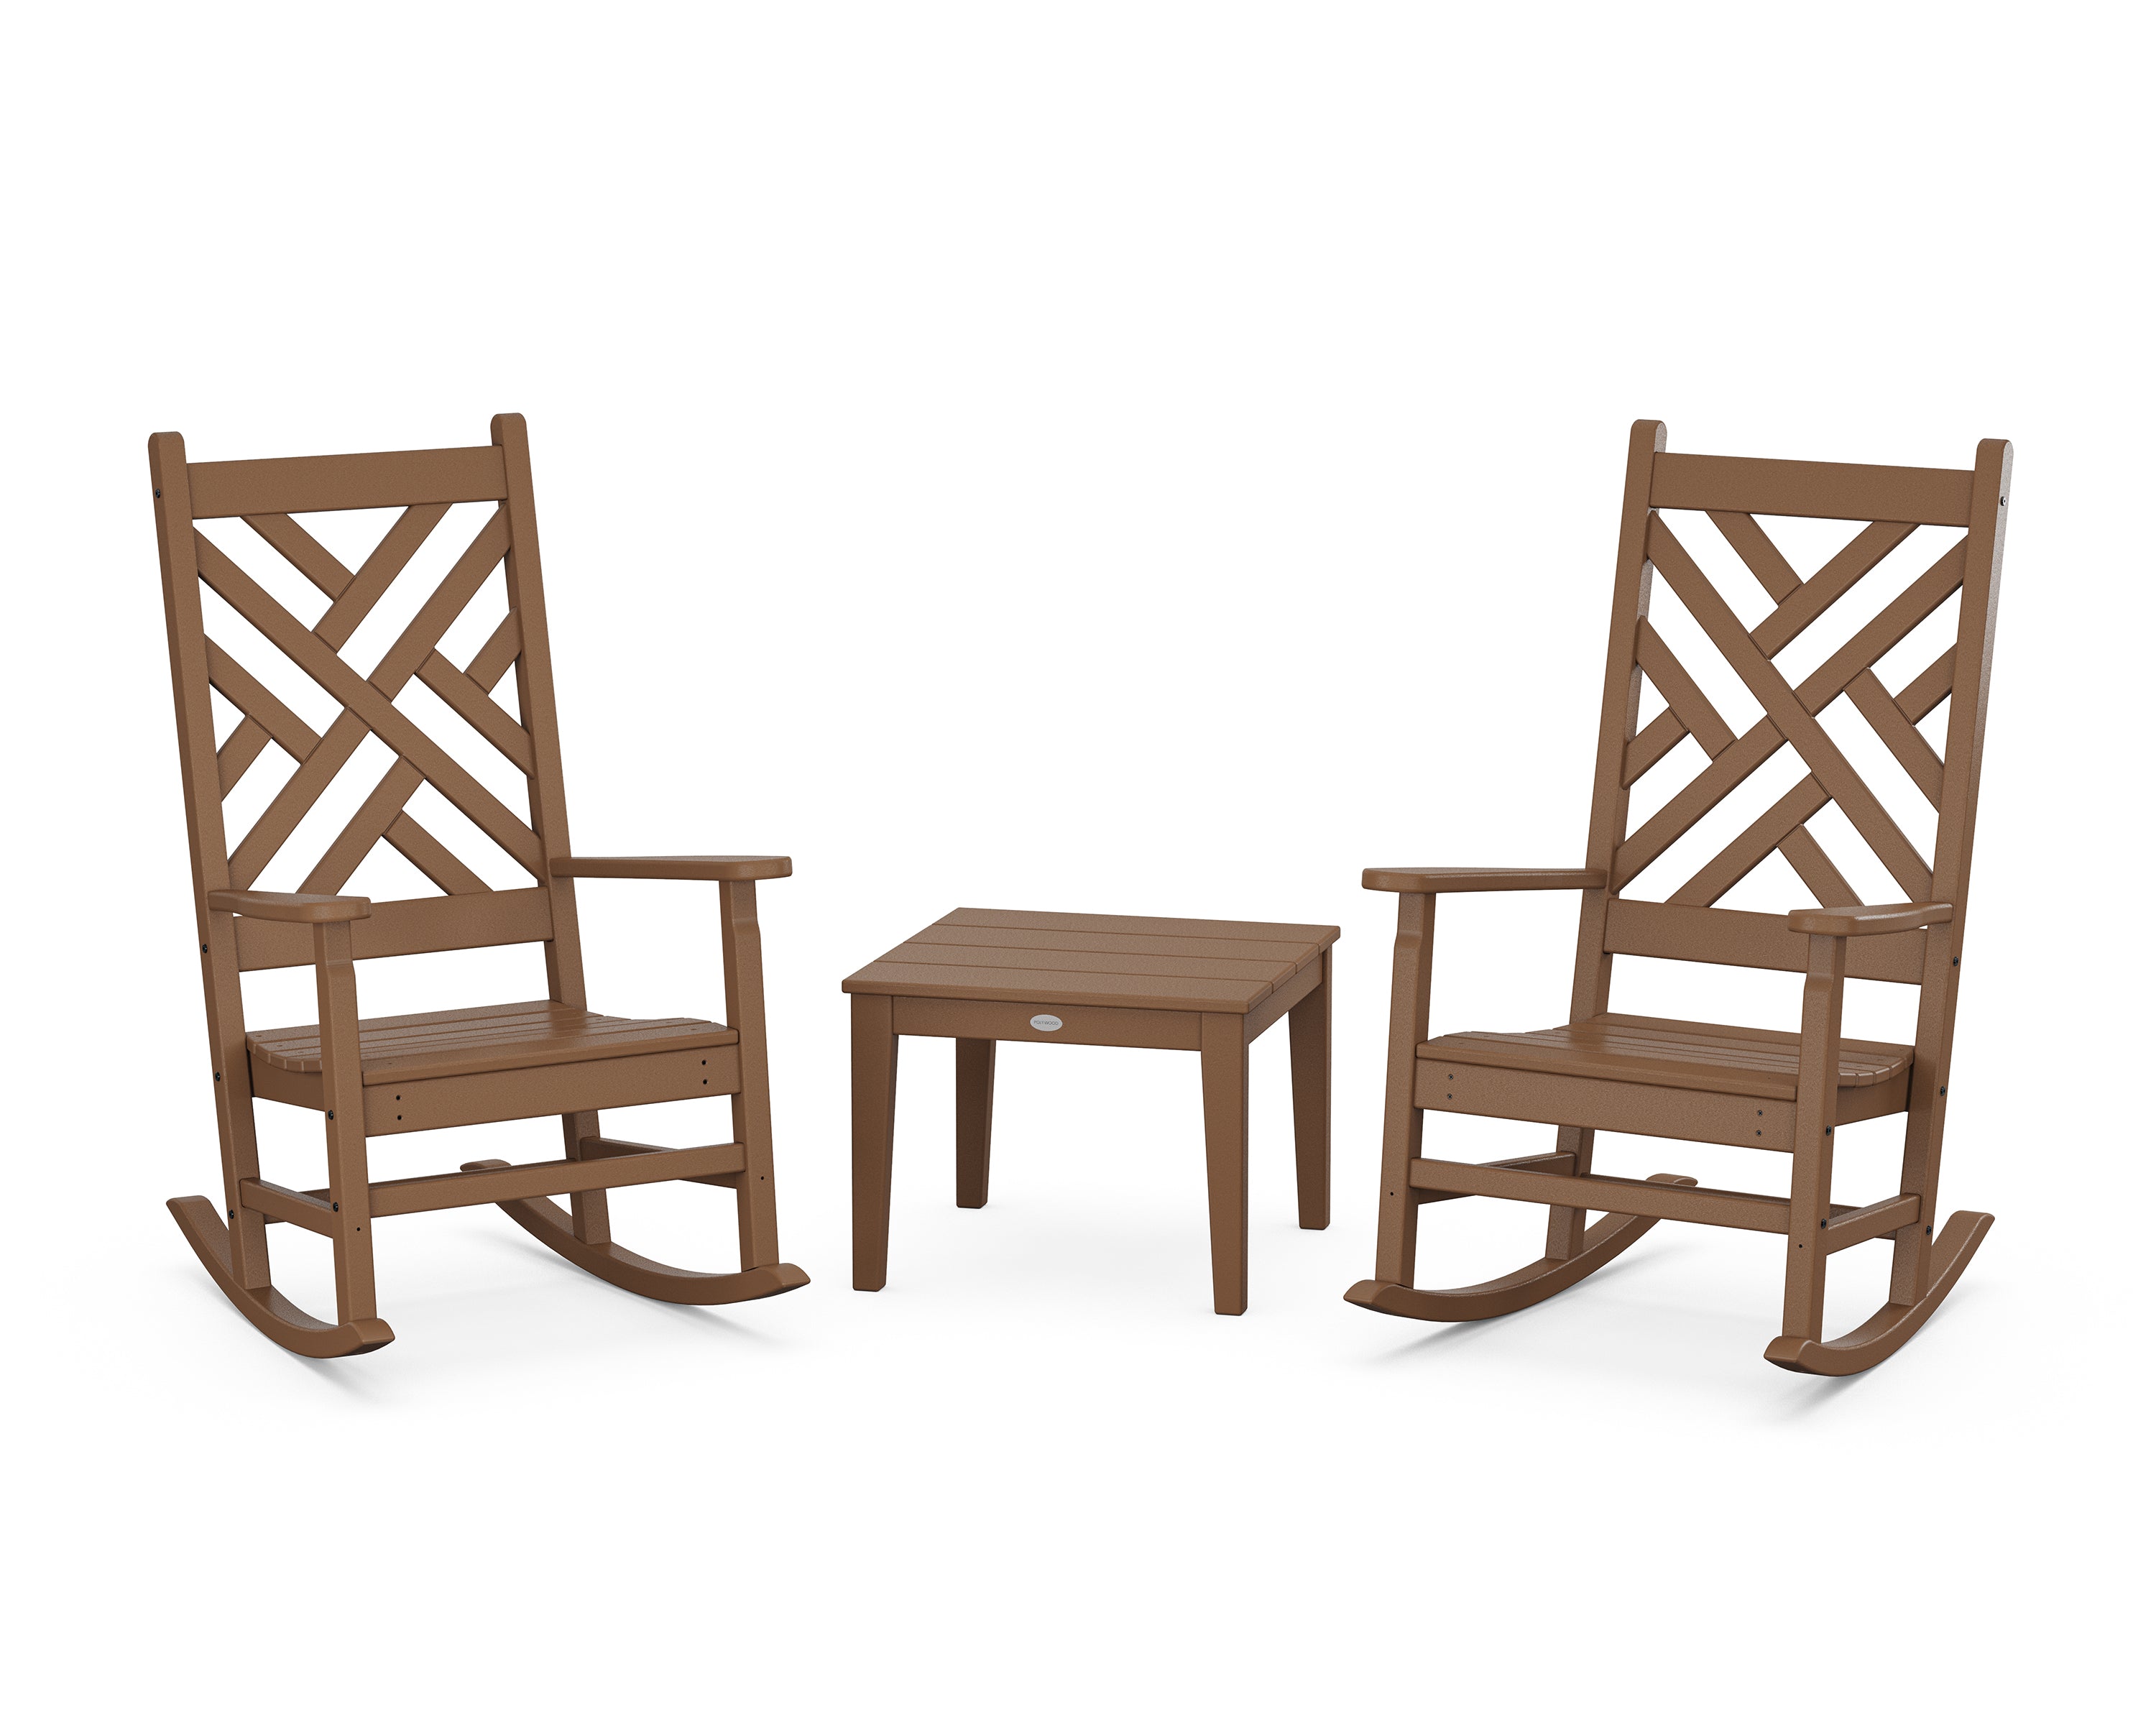 POLYWOOD® Chippendale 3-Piece Rocking Chair Set in Teak